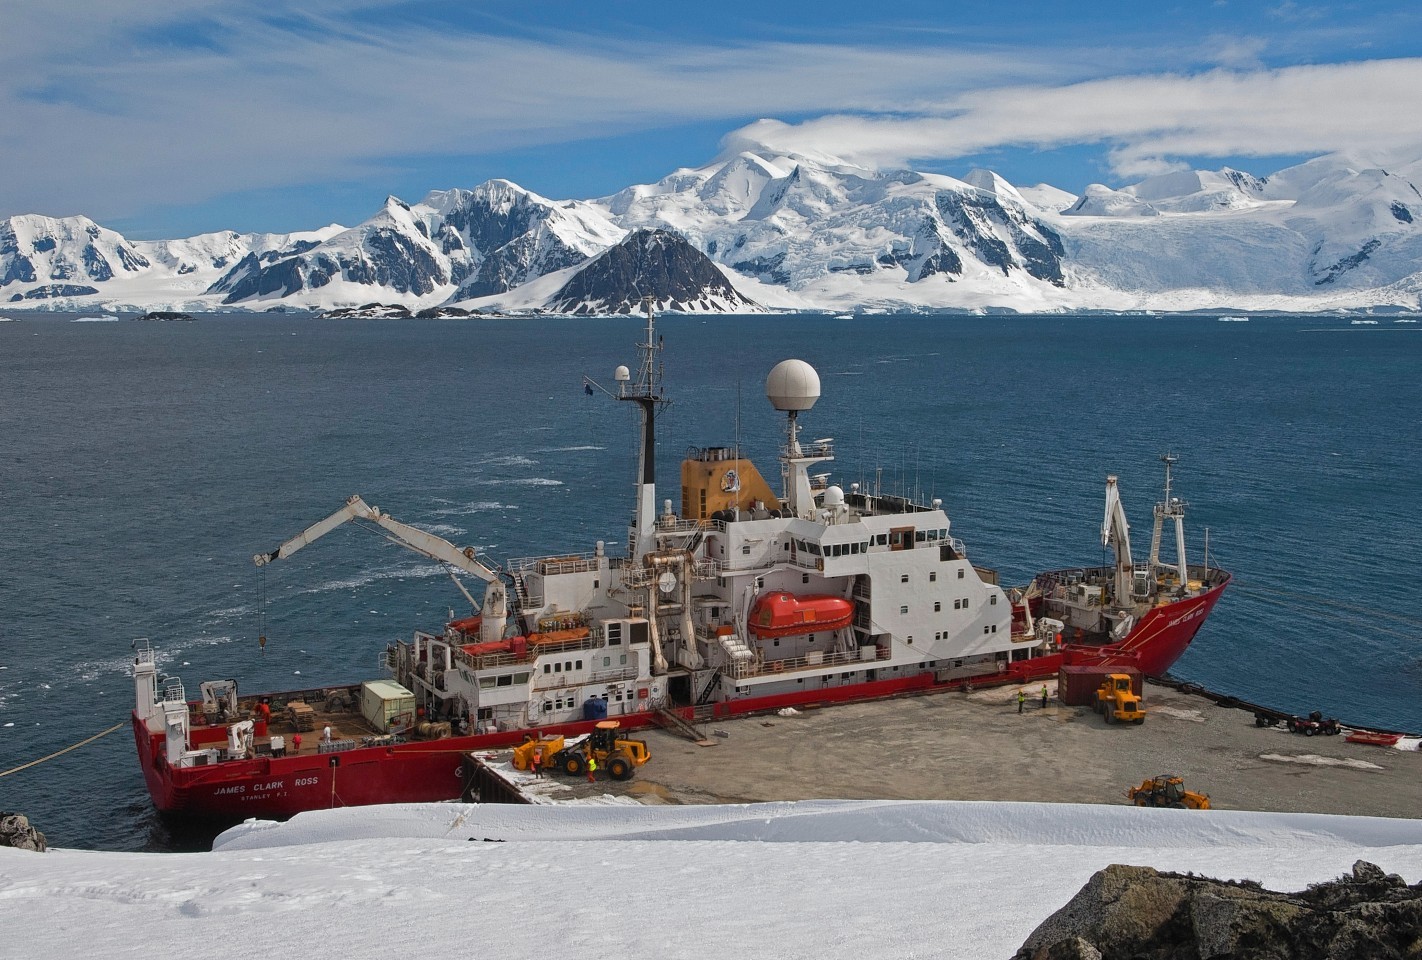 Temperatures at Rothera can drop to – 20C in the winter months